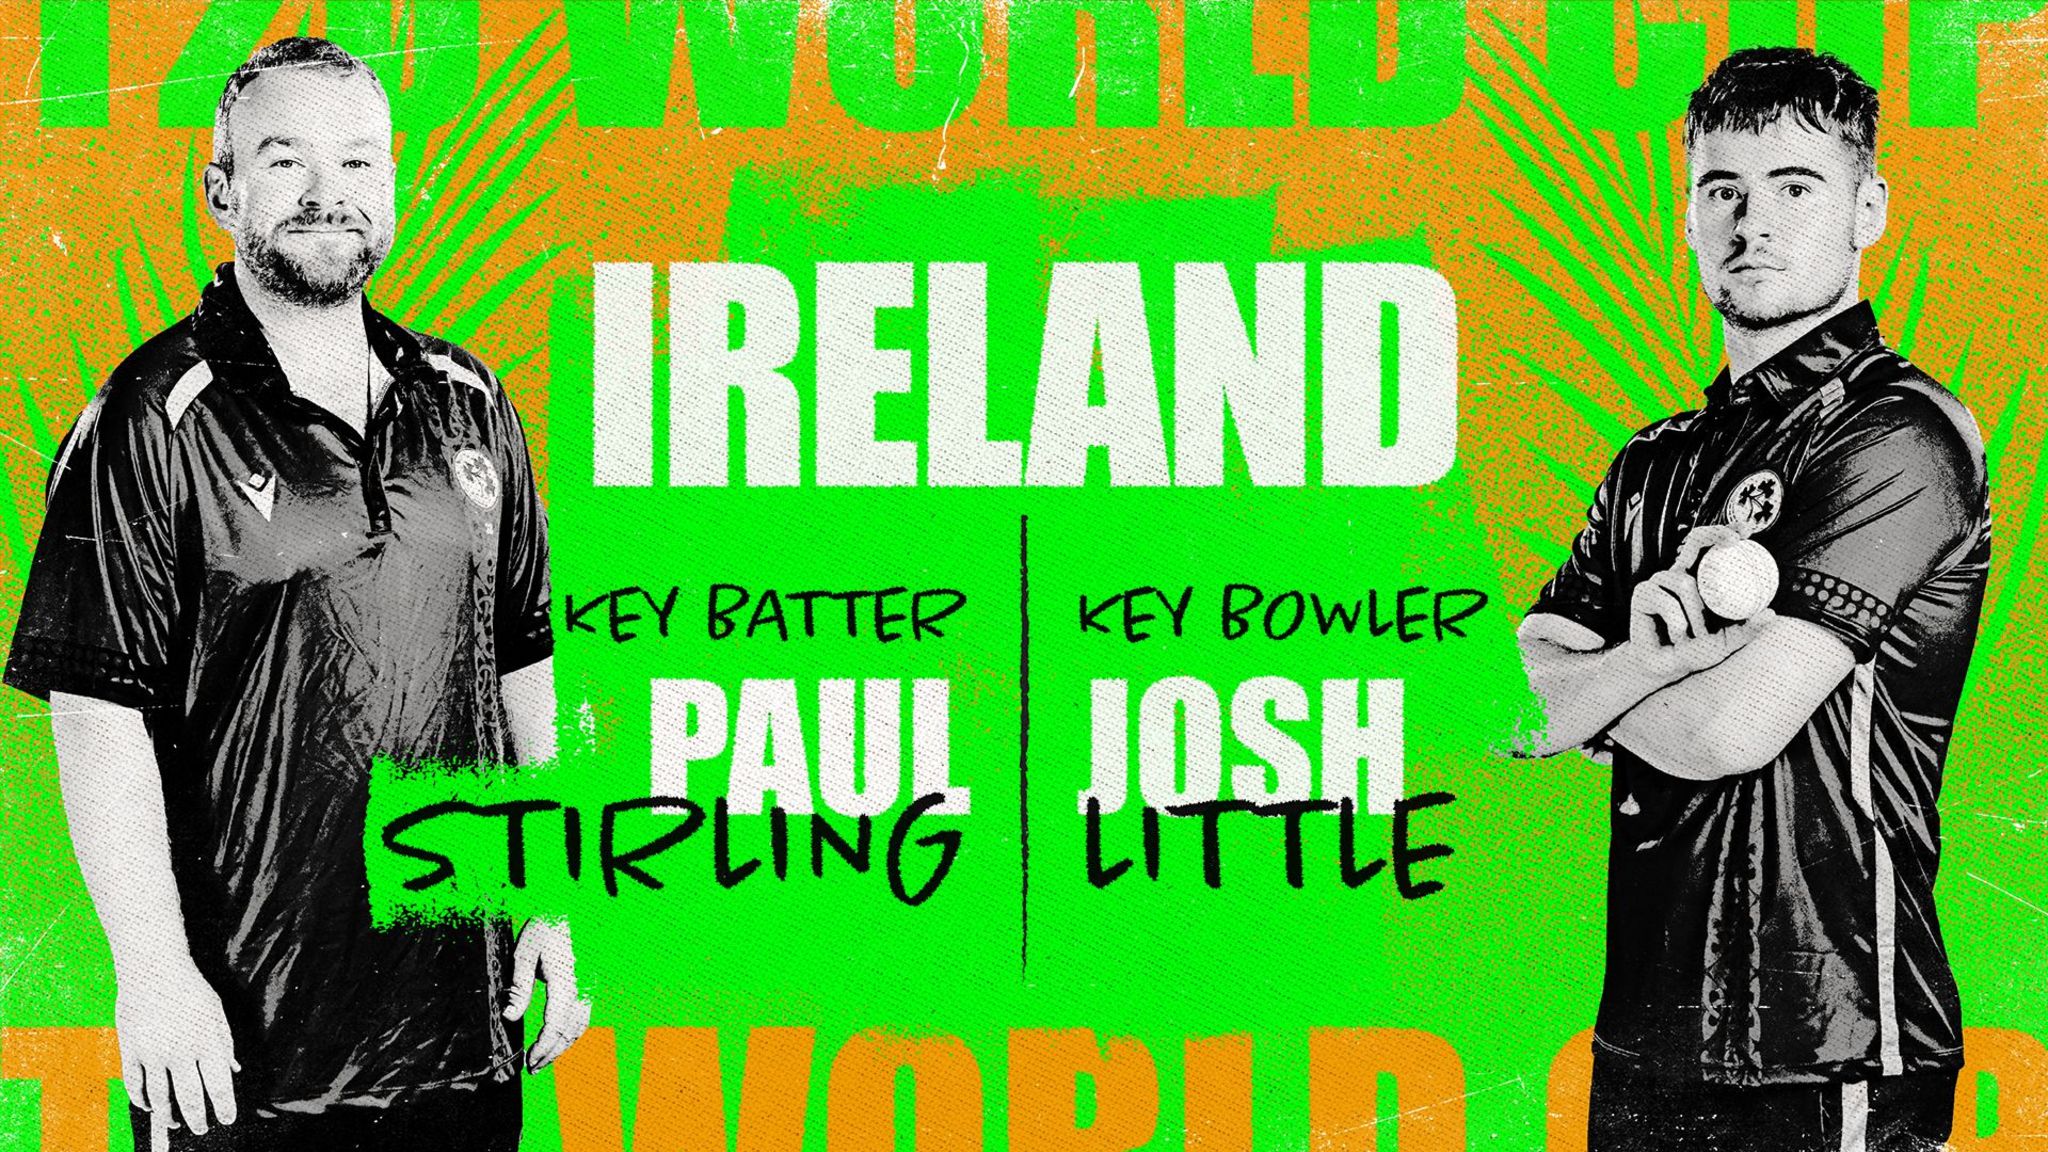 A graphic showing Paul Stirling and Josh Littler as Ireland's key batter and bowler at the Men's T20 World Cup